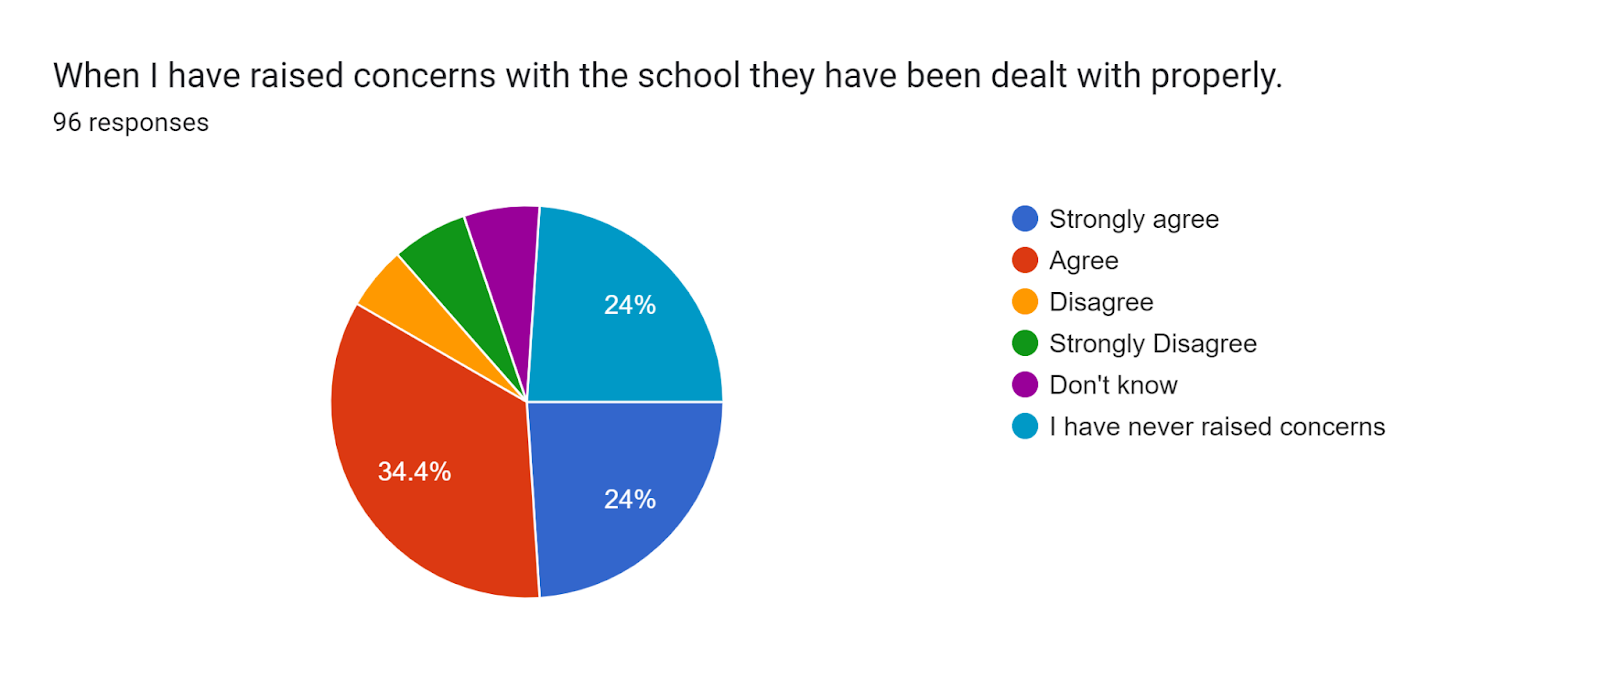 Forms response chart. Question title: When I have raised concerns with the school they have been dealt with properly.
. Number of responses: 96 responses.